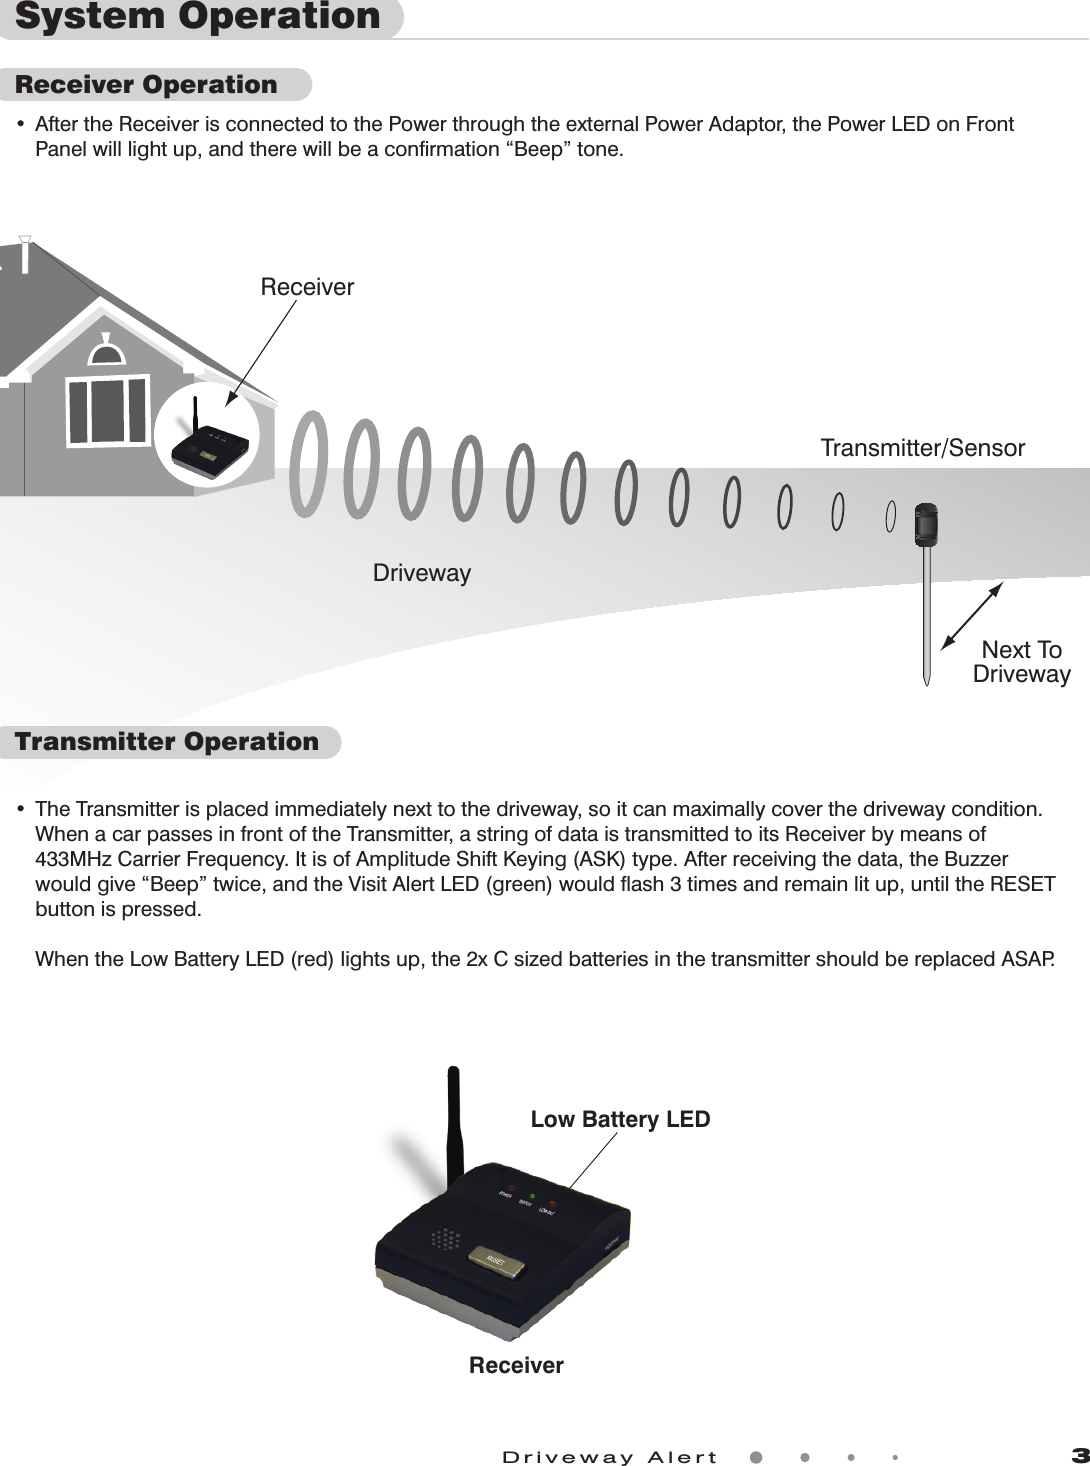 Driveway Alert                   3Transmitter/SensorDrivewayNext ToDrivewayReceiver• TheTransmitterisplacedimmediatelynexttothedriveway,soitcanmaximallycoverthedrivewaycondition. WhenacarpassesinfrontoftheTransmitter,astringofdataistransmittedtoitsReceiverbymeansof 433MHzCarrierFrequency.ItisofAmplitudeShiftKeying(ASK)type.Afterreceivingthedata,theBuzzer  wouldgive“Beep”twice,andtheVisitAlertLED(green)wouldash3timesandremainlitup,untiltheRESET buttonispressed. WhentheLowBatteryLED(red)lightsup,the2xCsizedbatteriesinthetransmittershouldbereplacedASAP.System OperationReceiver Operation• AftertheReceiverisconnectedtothePowerthroughtheexternalPowerAdaptor,thePowerLEDonFront  Panelwilllightup,andtherewillbeaconrmation“Beep”tone.Transmitter OperationLow Battery LEDReceiver